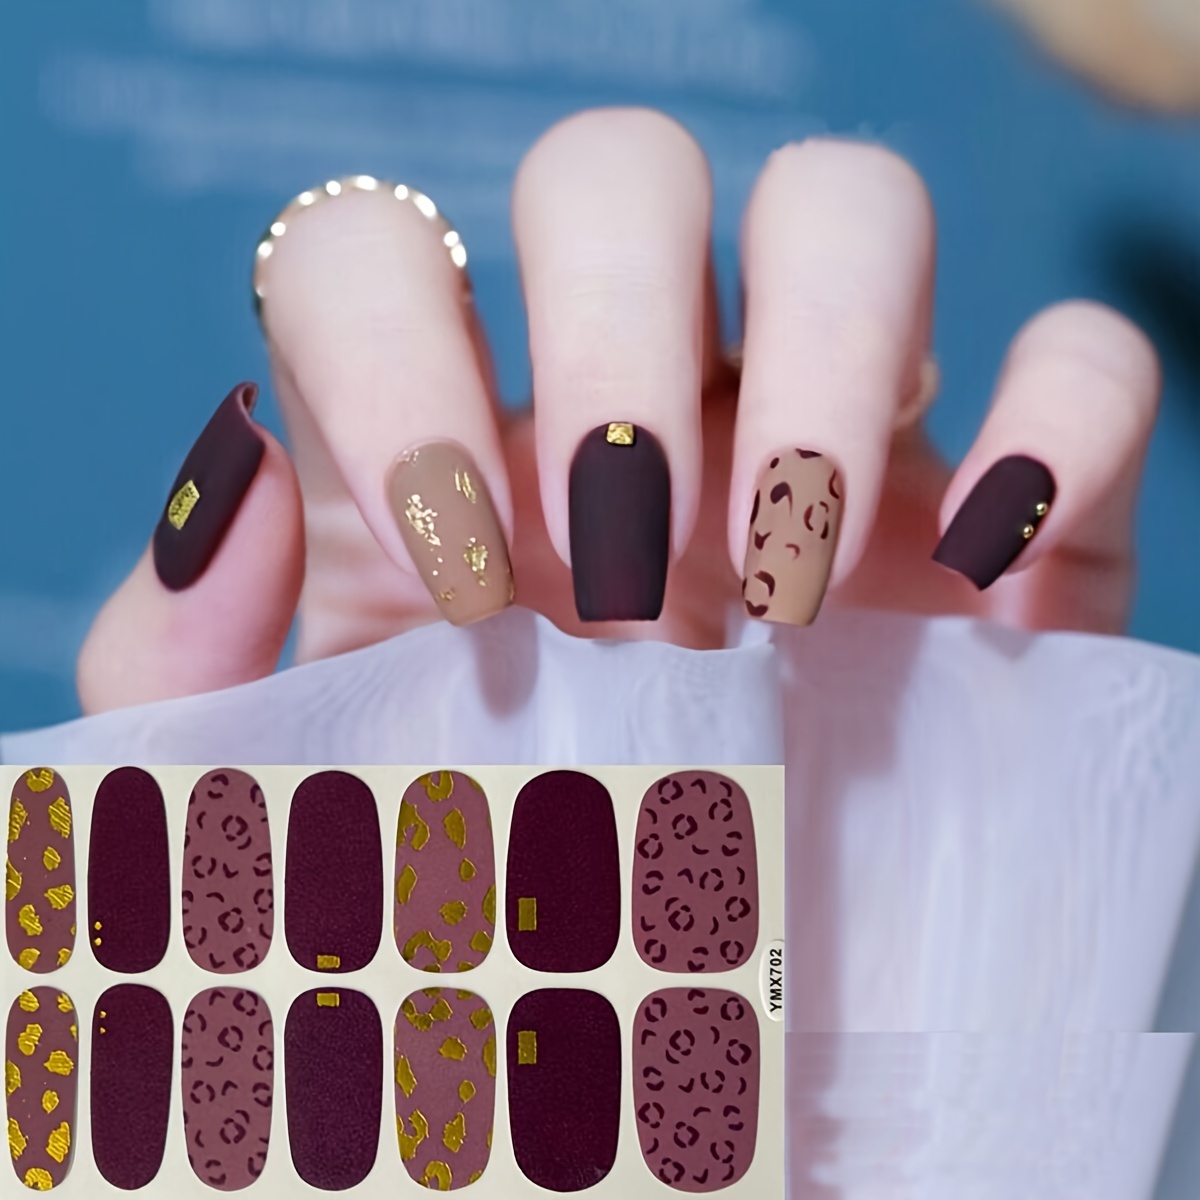 New Leopard Print Stickers For Nails Wild Animal Texture Cute Cows